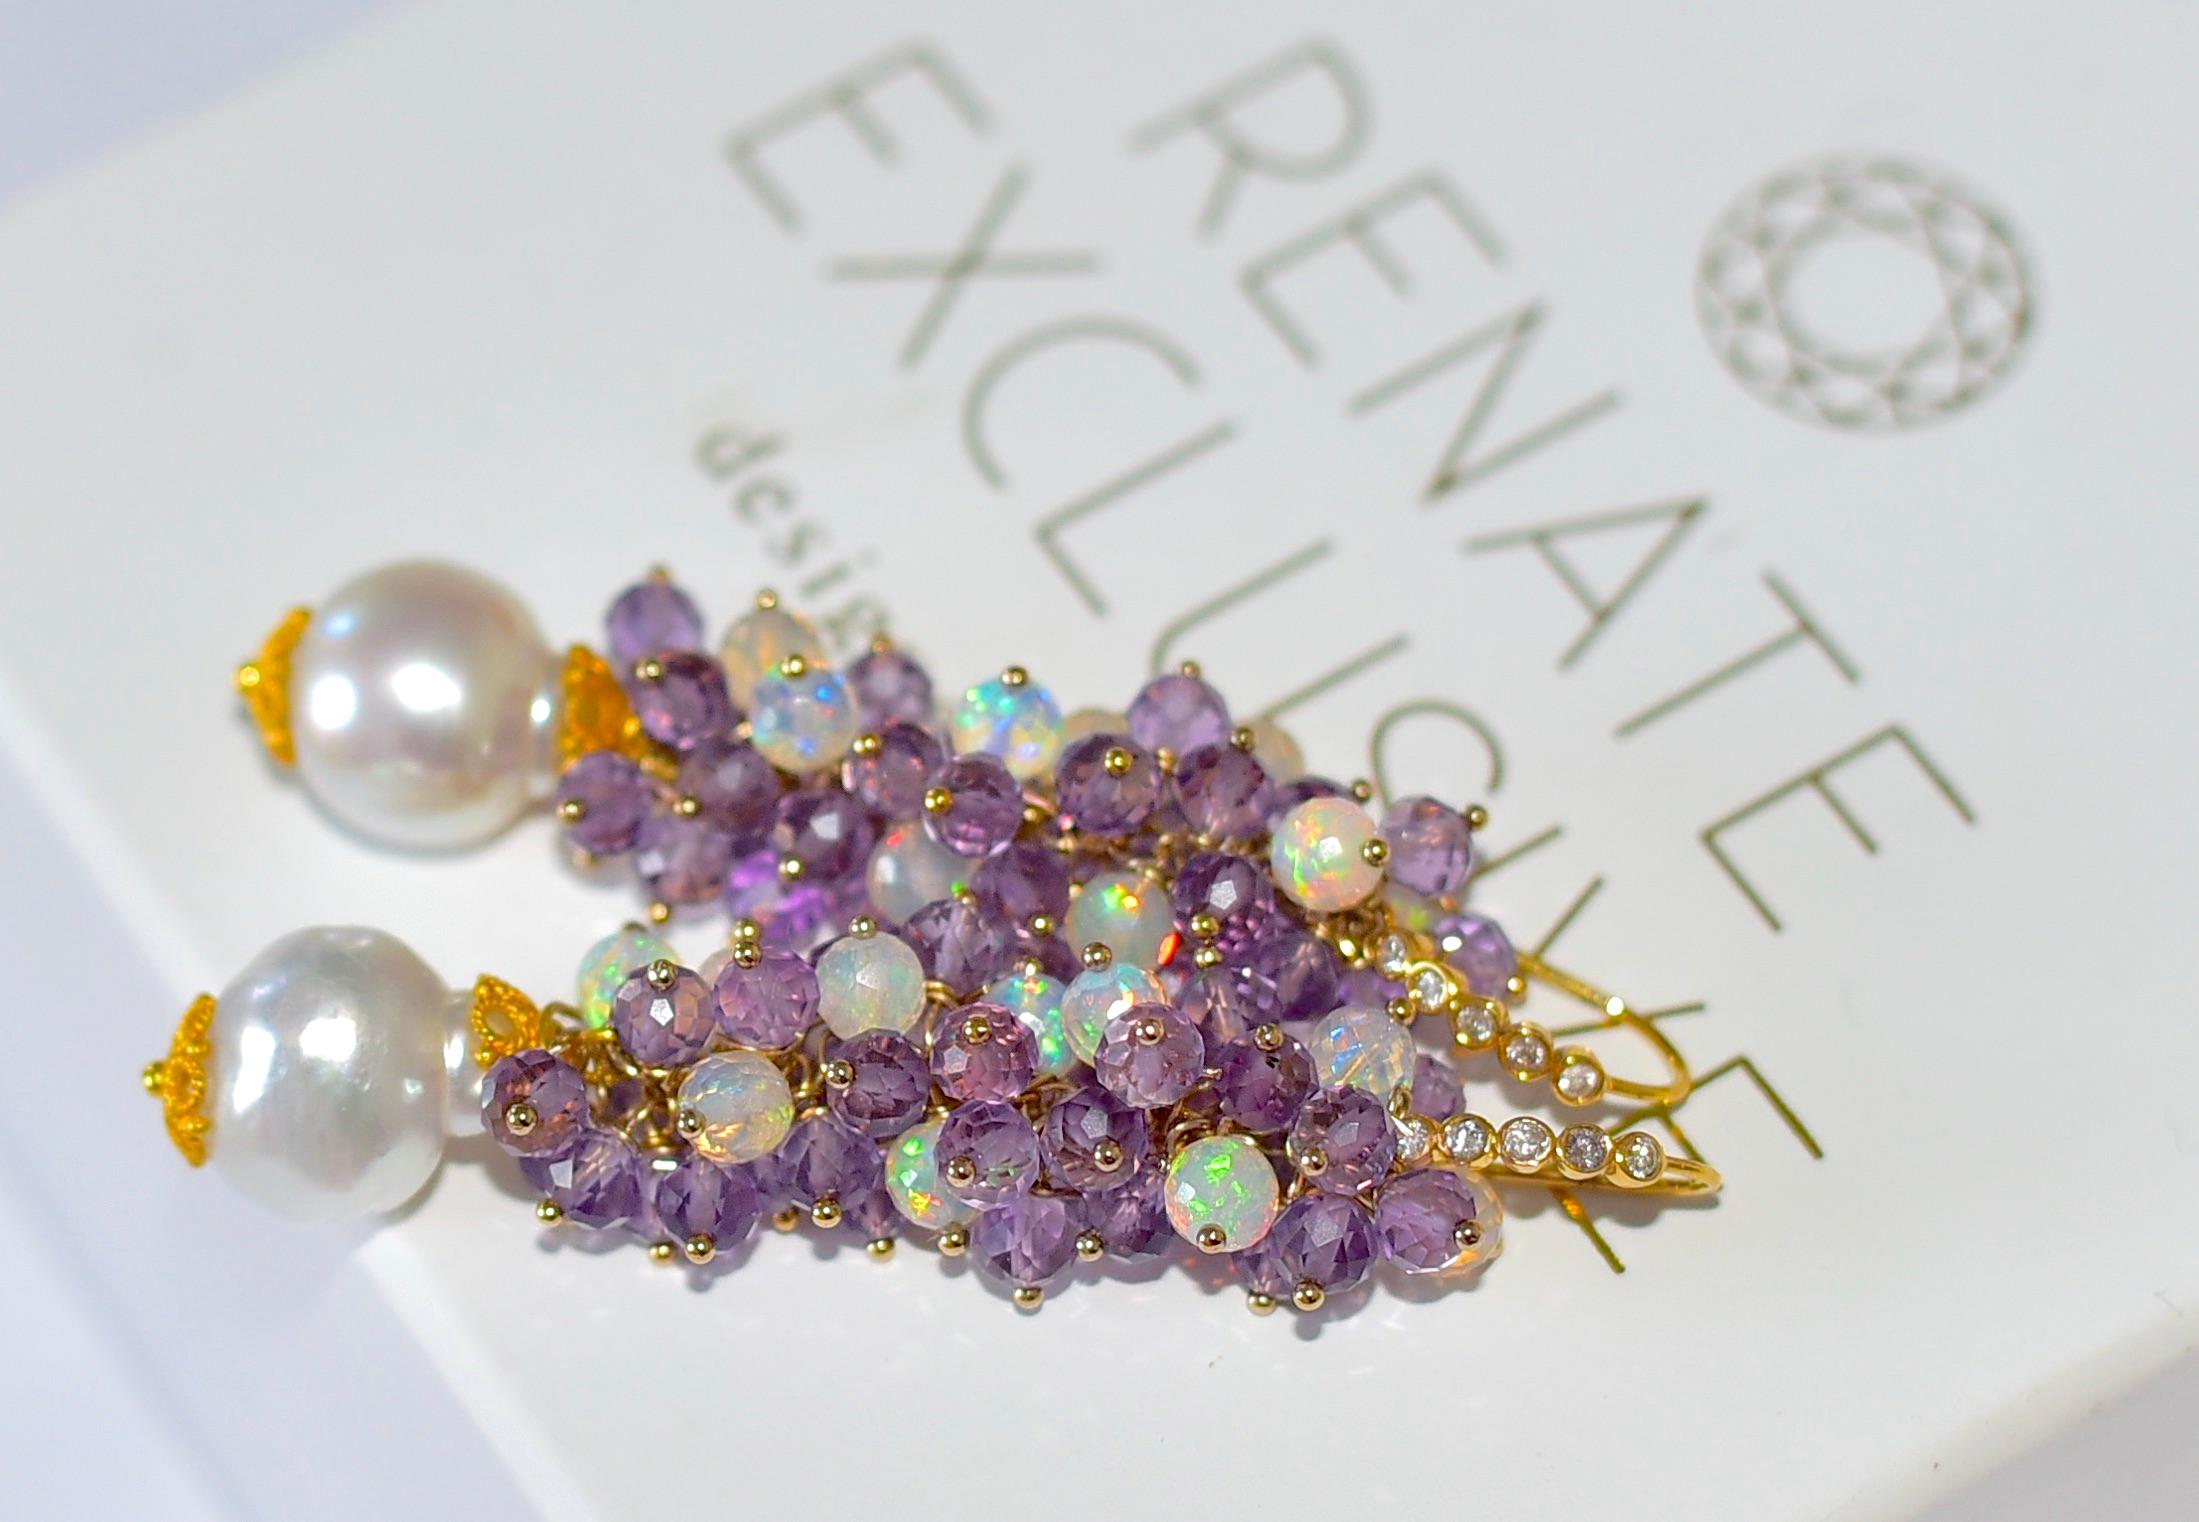 Renate Exclusive's most luxurious and popular handmade work! Mixed with Lavender Amethyst, Ethiopian Crystal Opal, and South Sea Pearl. The earring is decorated with a 14K Solid Yellow Gold post with diamond accents. All together make a wonderful,